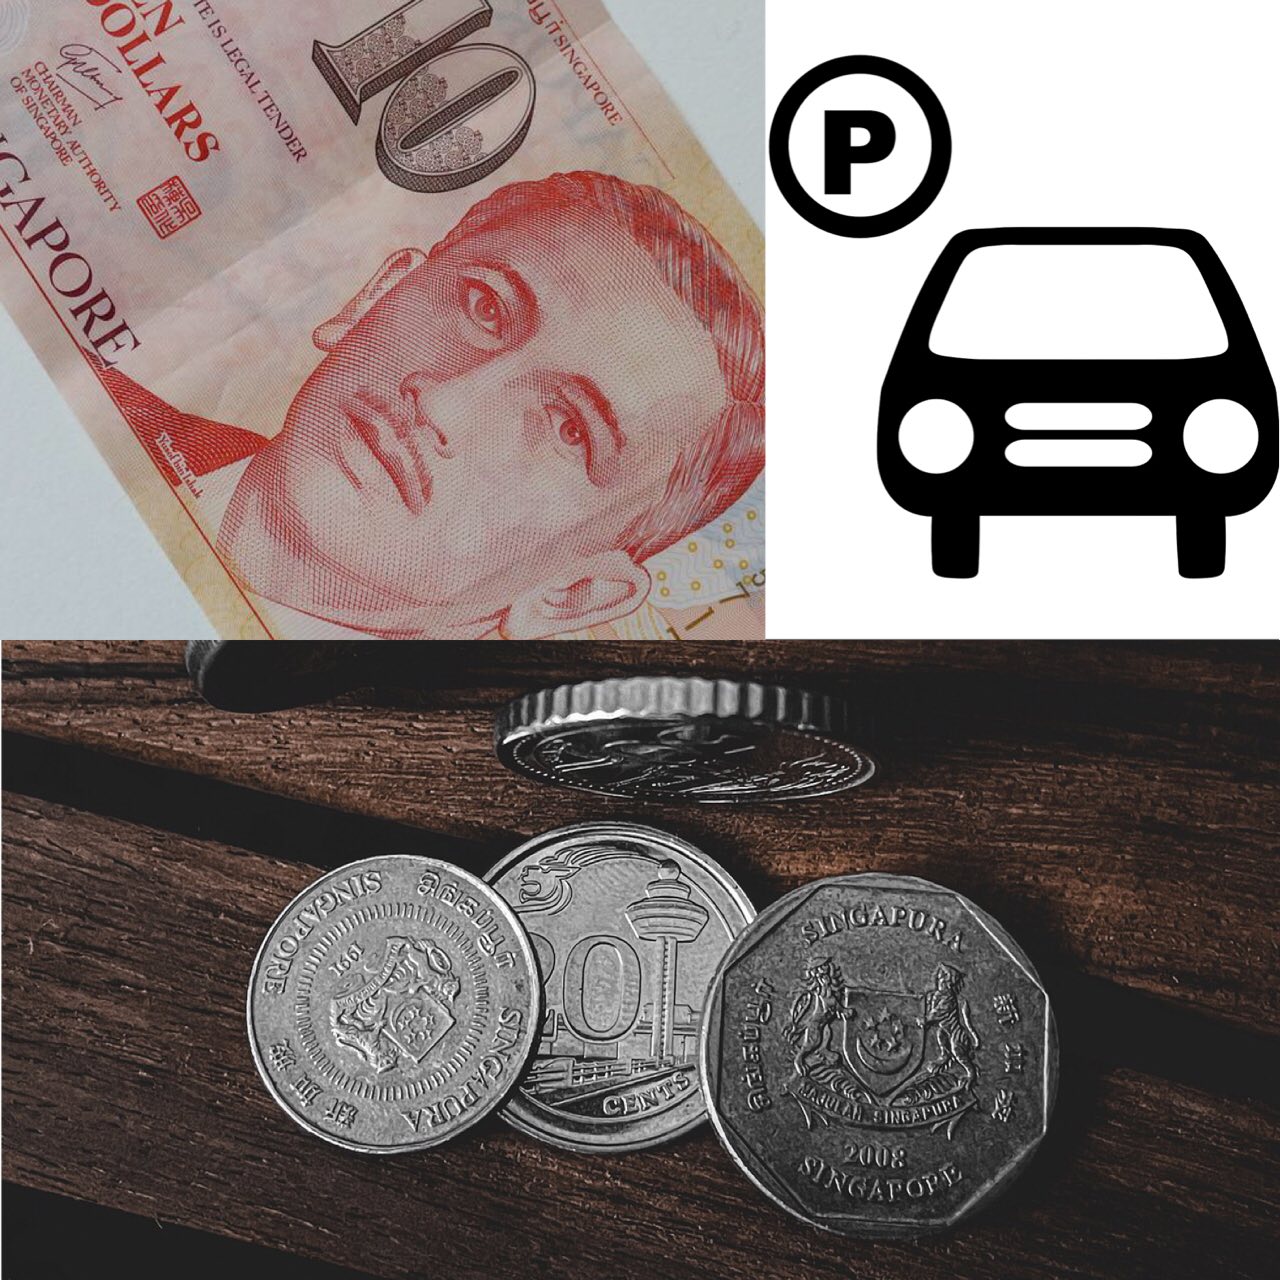 Cash Plus - a possible vehicle to park your idle funds